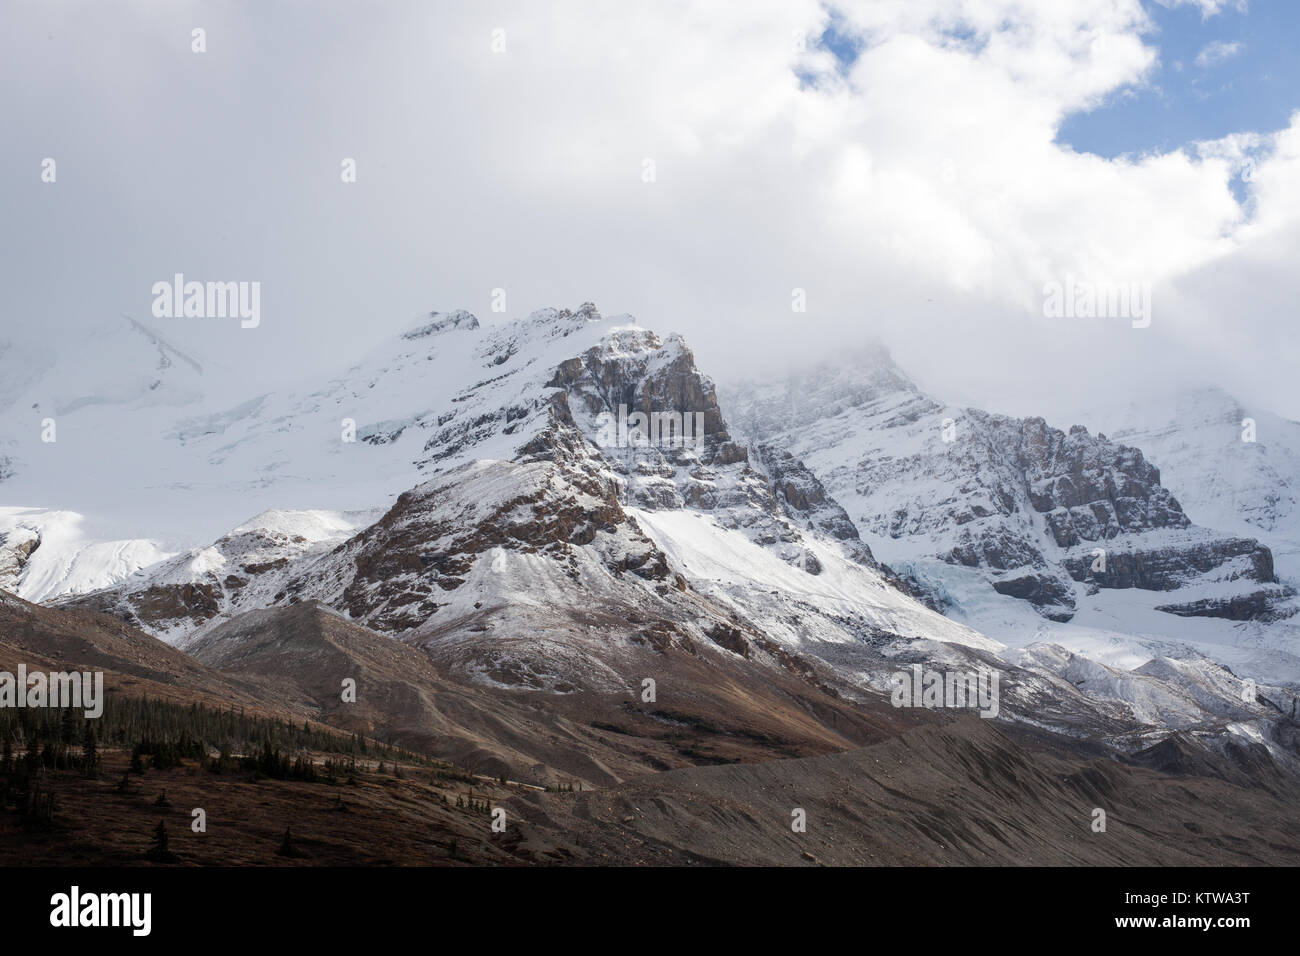 ATHABASCA GLACIER, ALBERTA, CANADA. - SEPTEMBER 2015: Fog consumes a mountain that is part of the famed Athabasca Glacier. Stock Photo